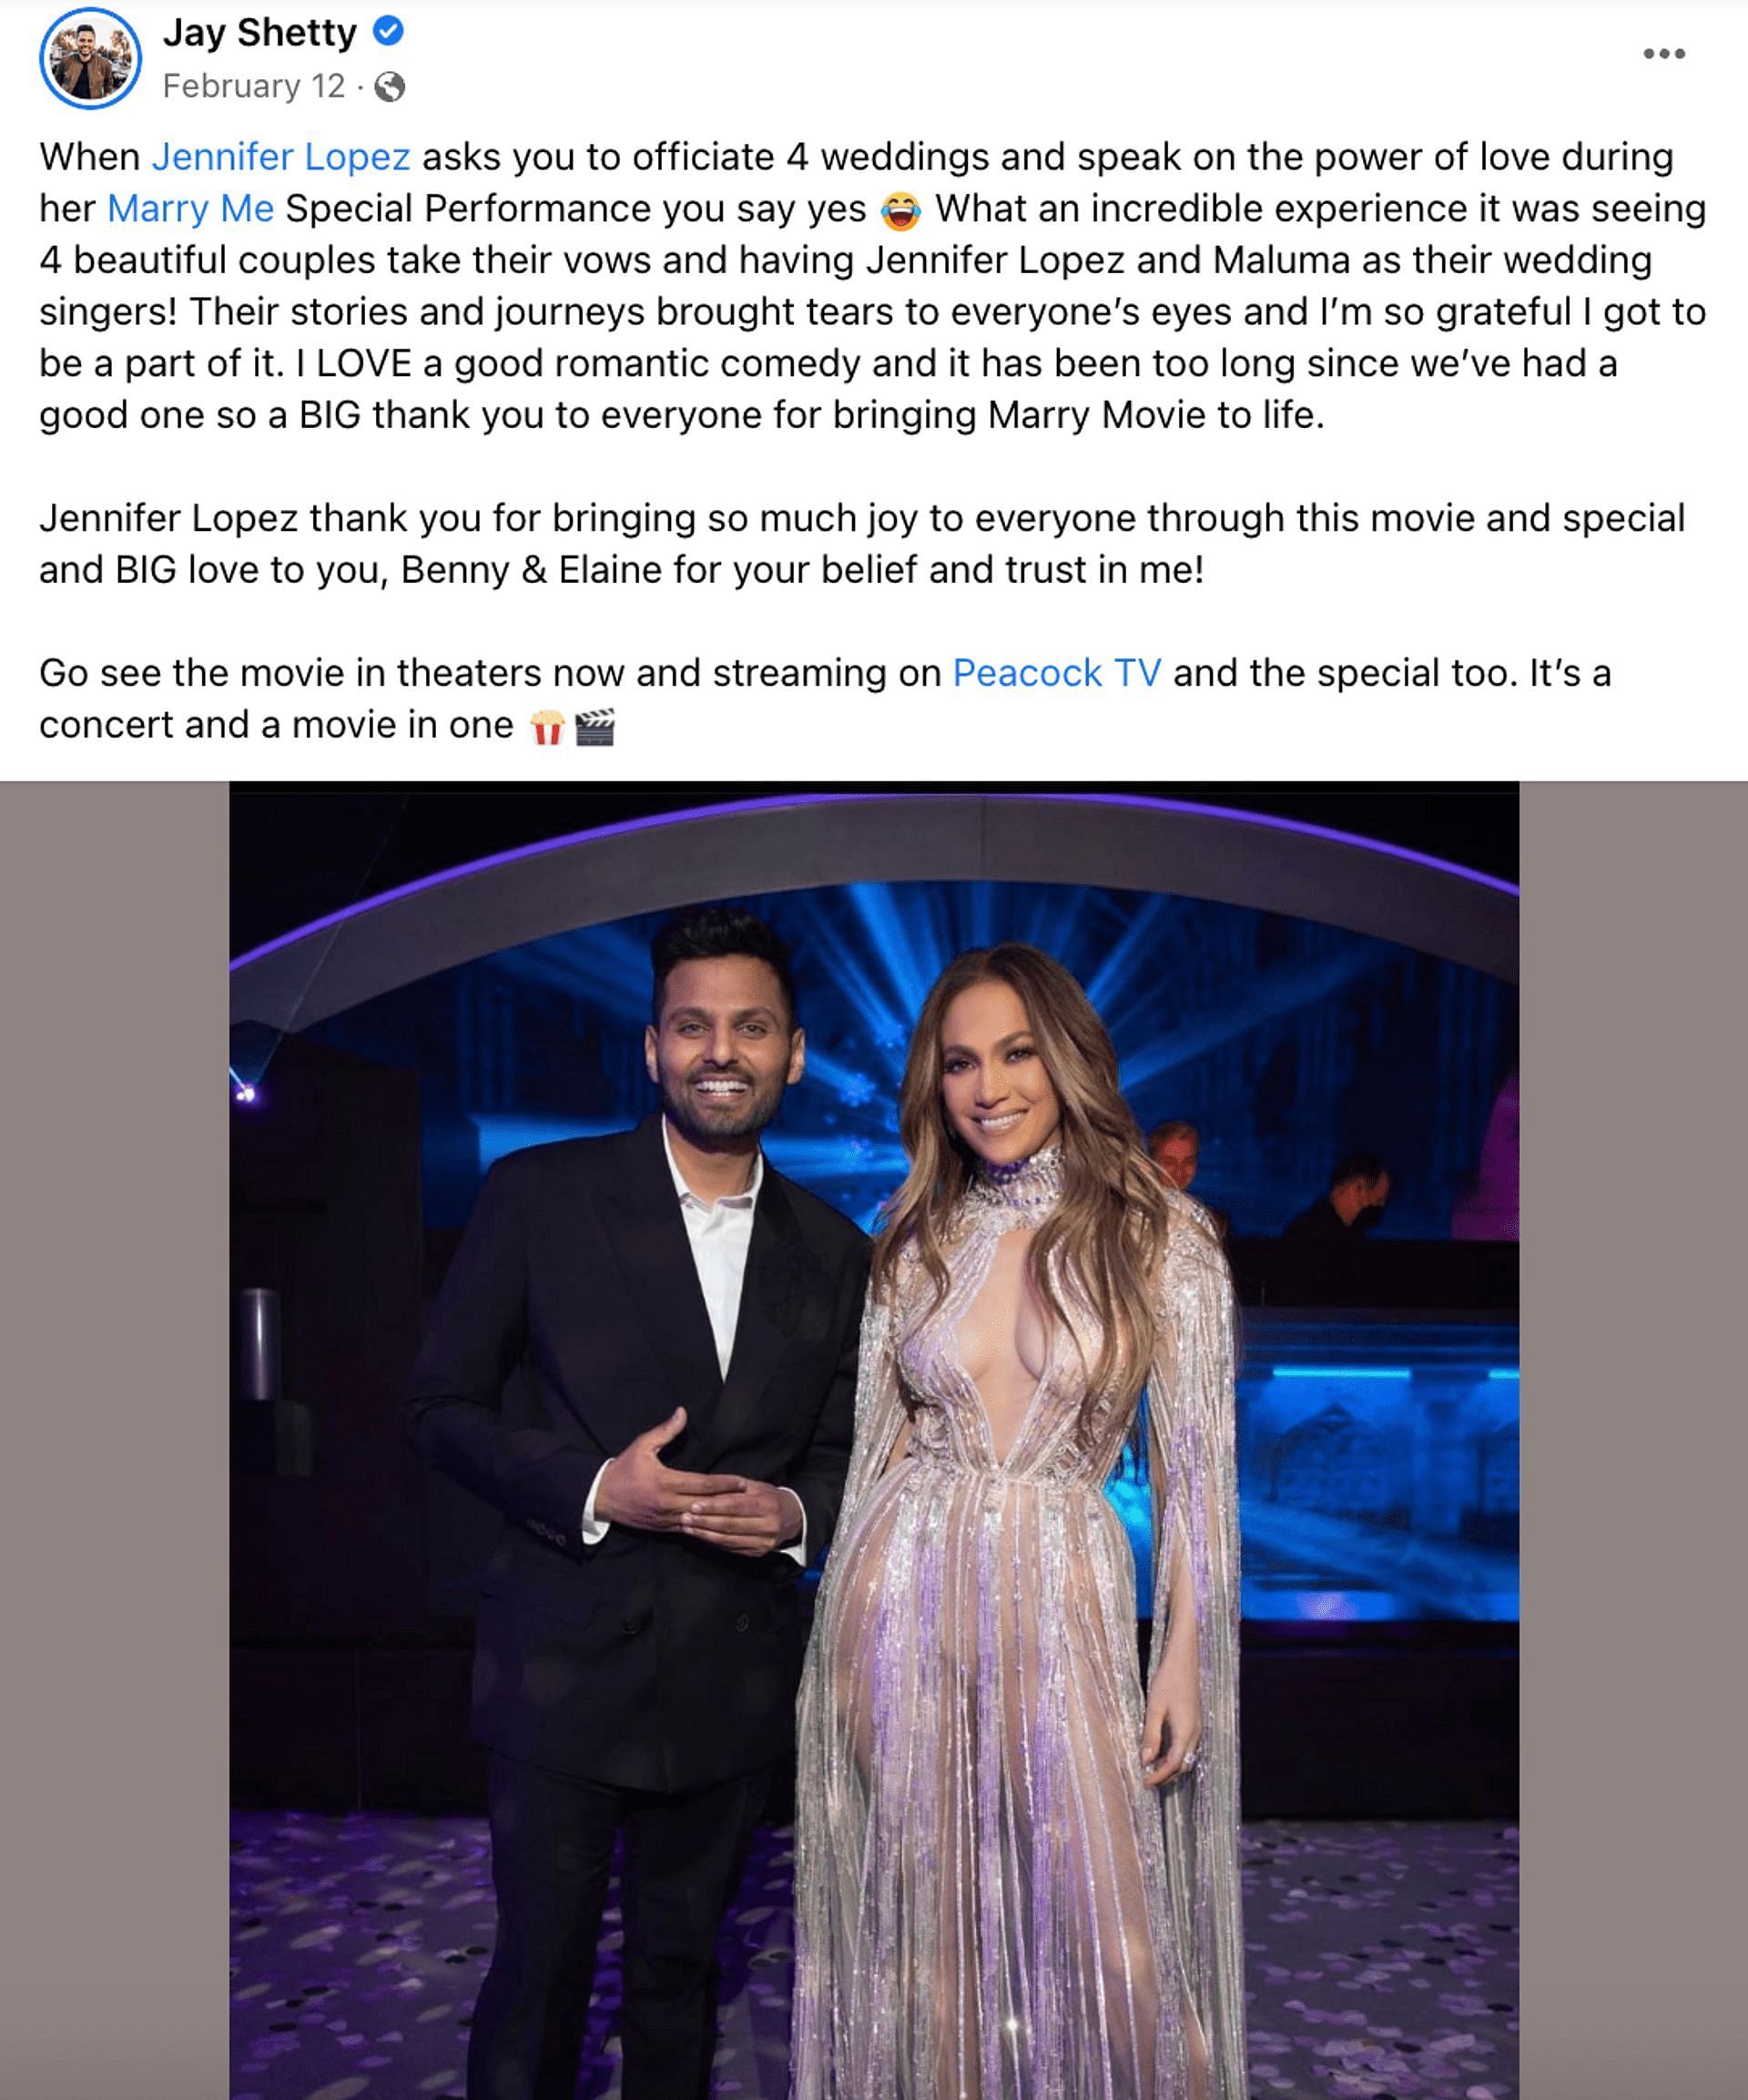 Jay Shetty to officiate second wedding between Jennifer Lopez and